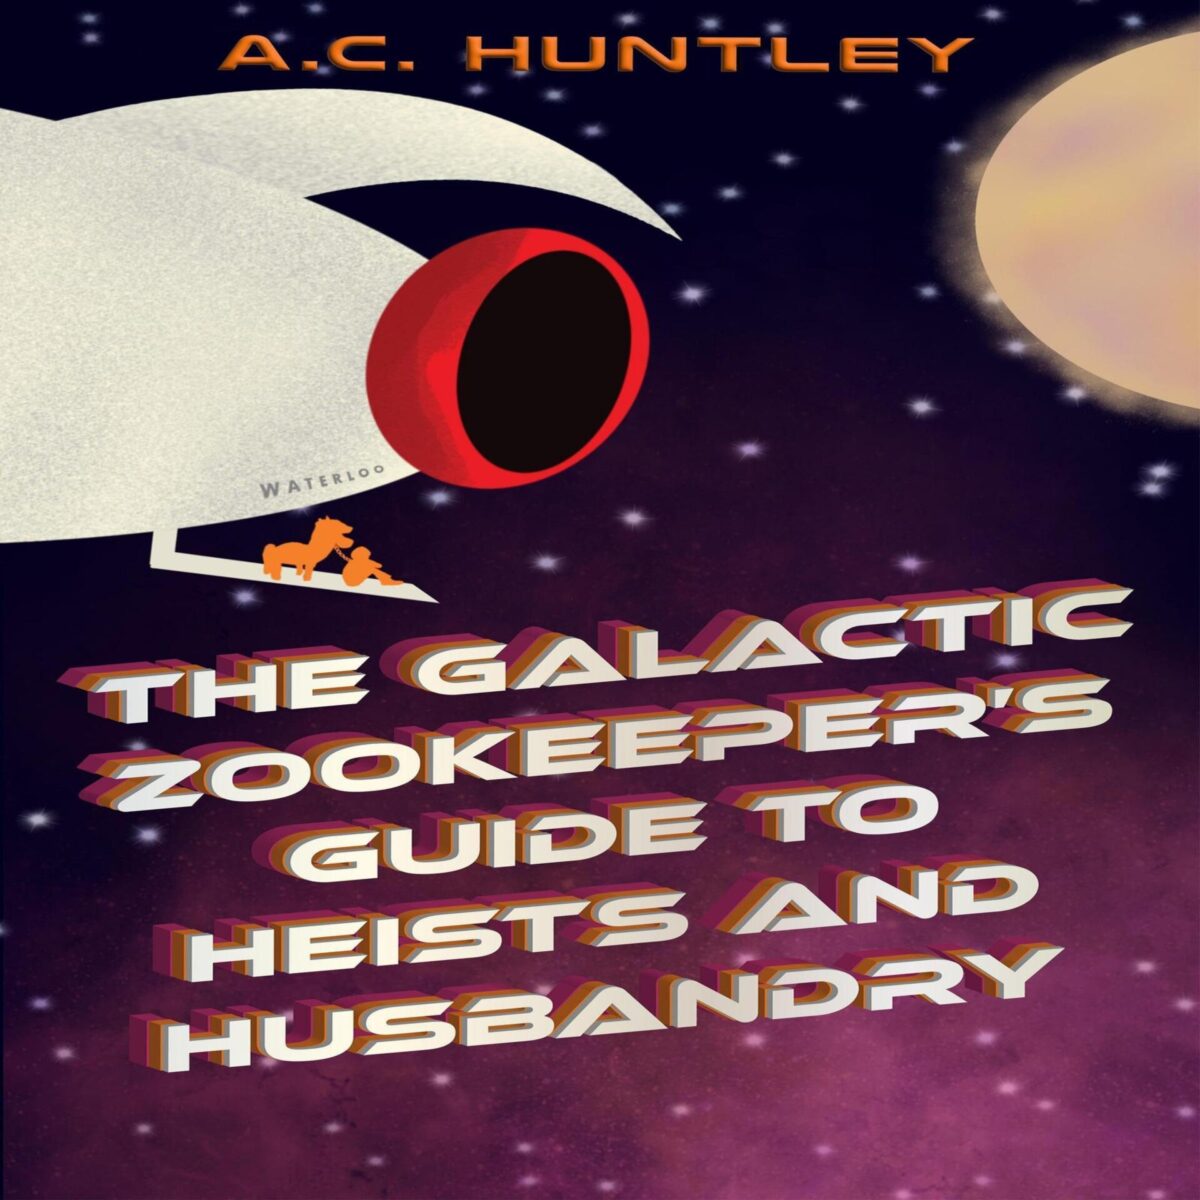 The Galactic Zookeeper’s Guide to Heists and Husbandry